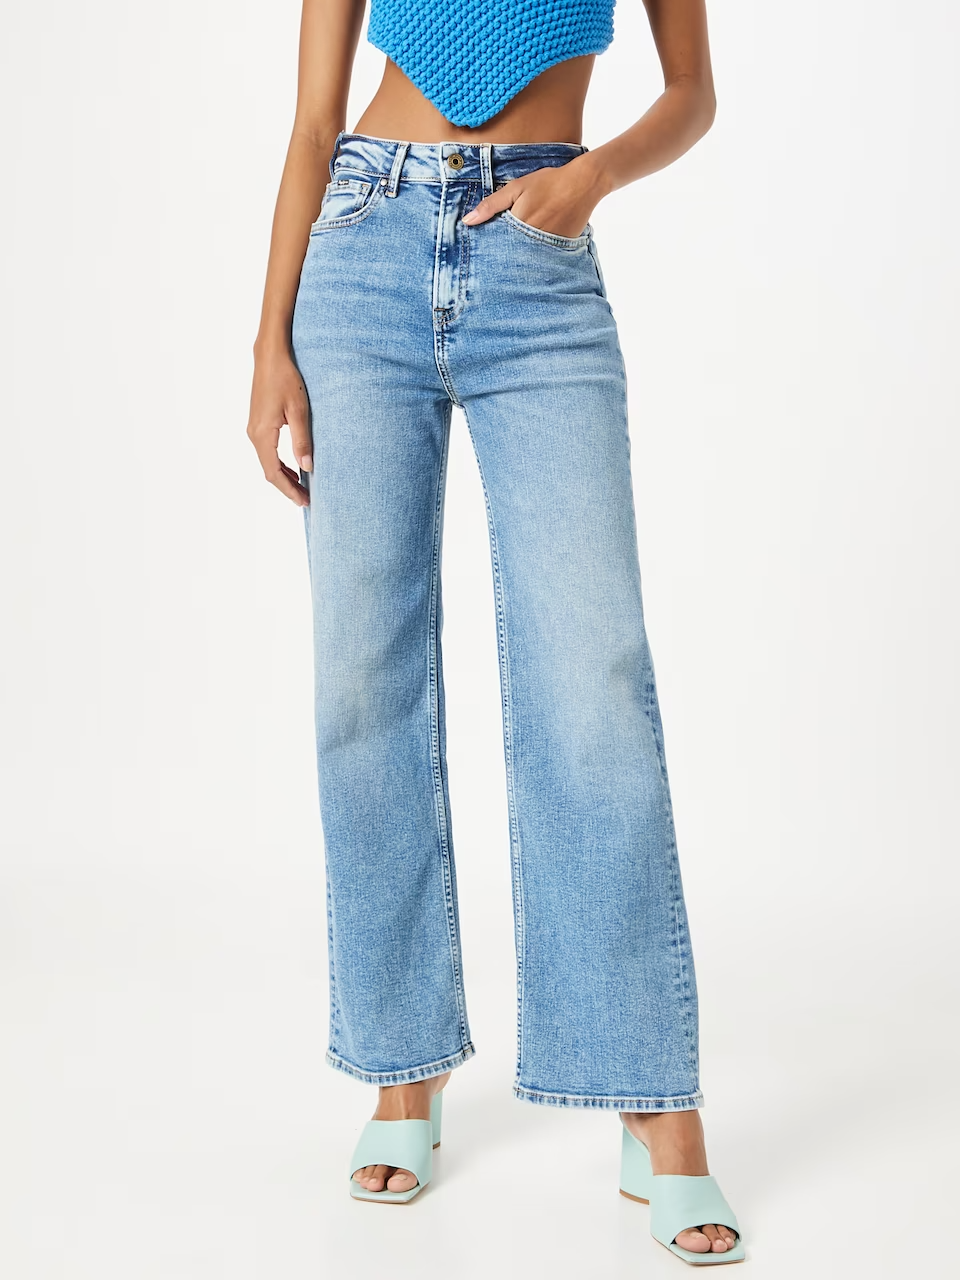 Buy Pepe Jeans LEXA SKY HIGH Jeans by Pepe Jeans